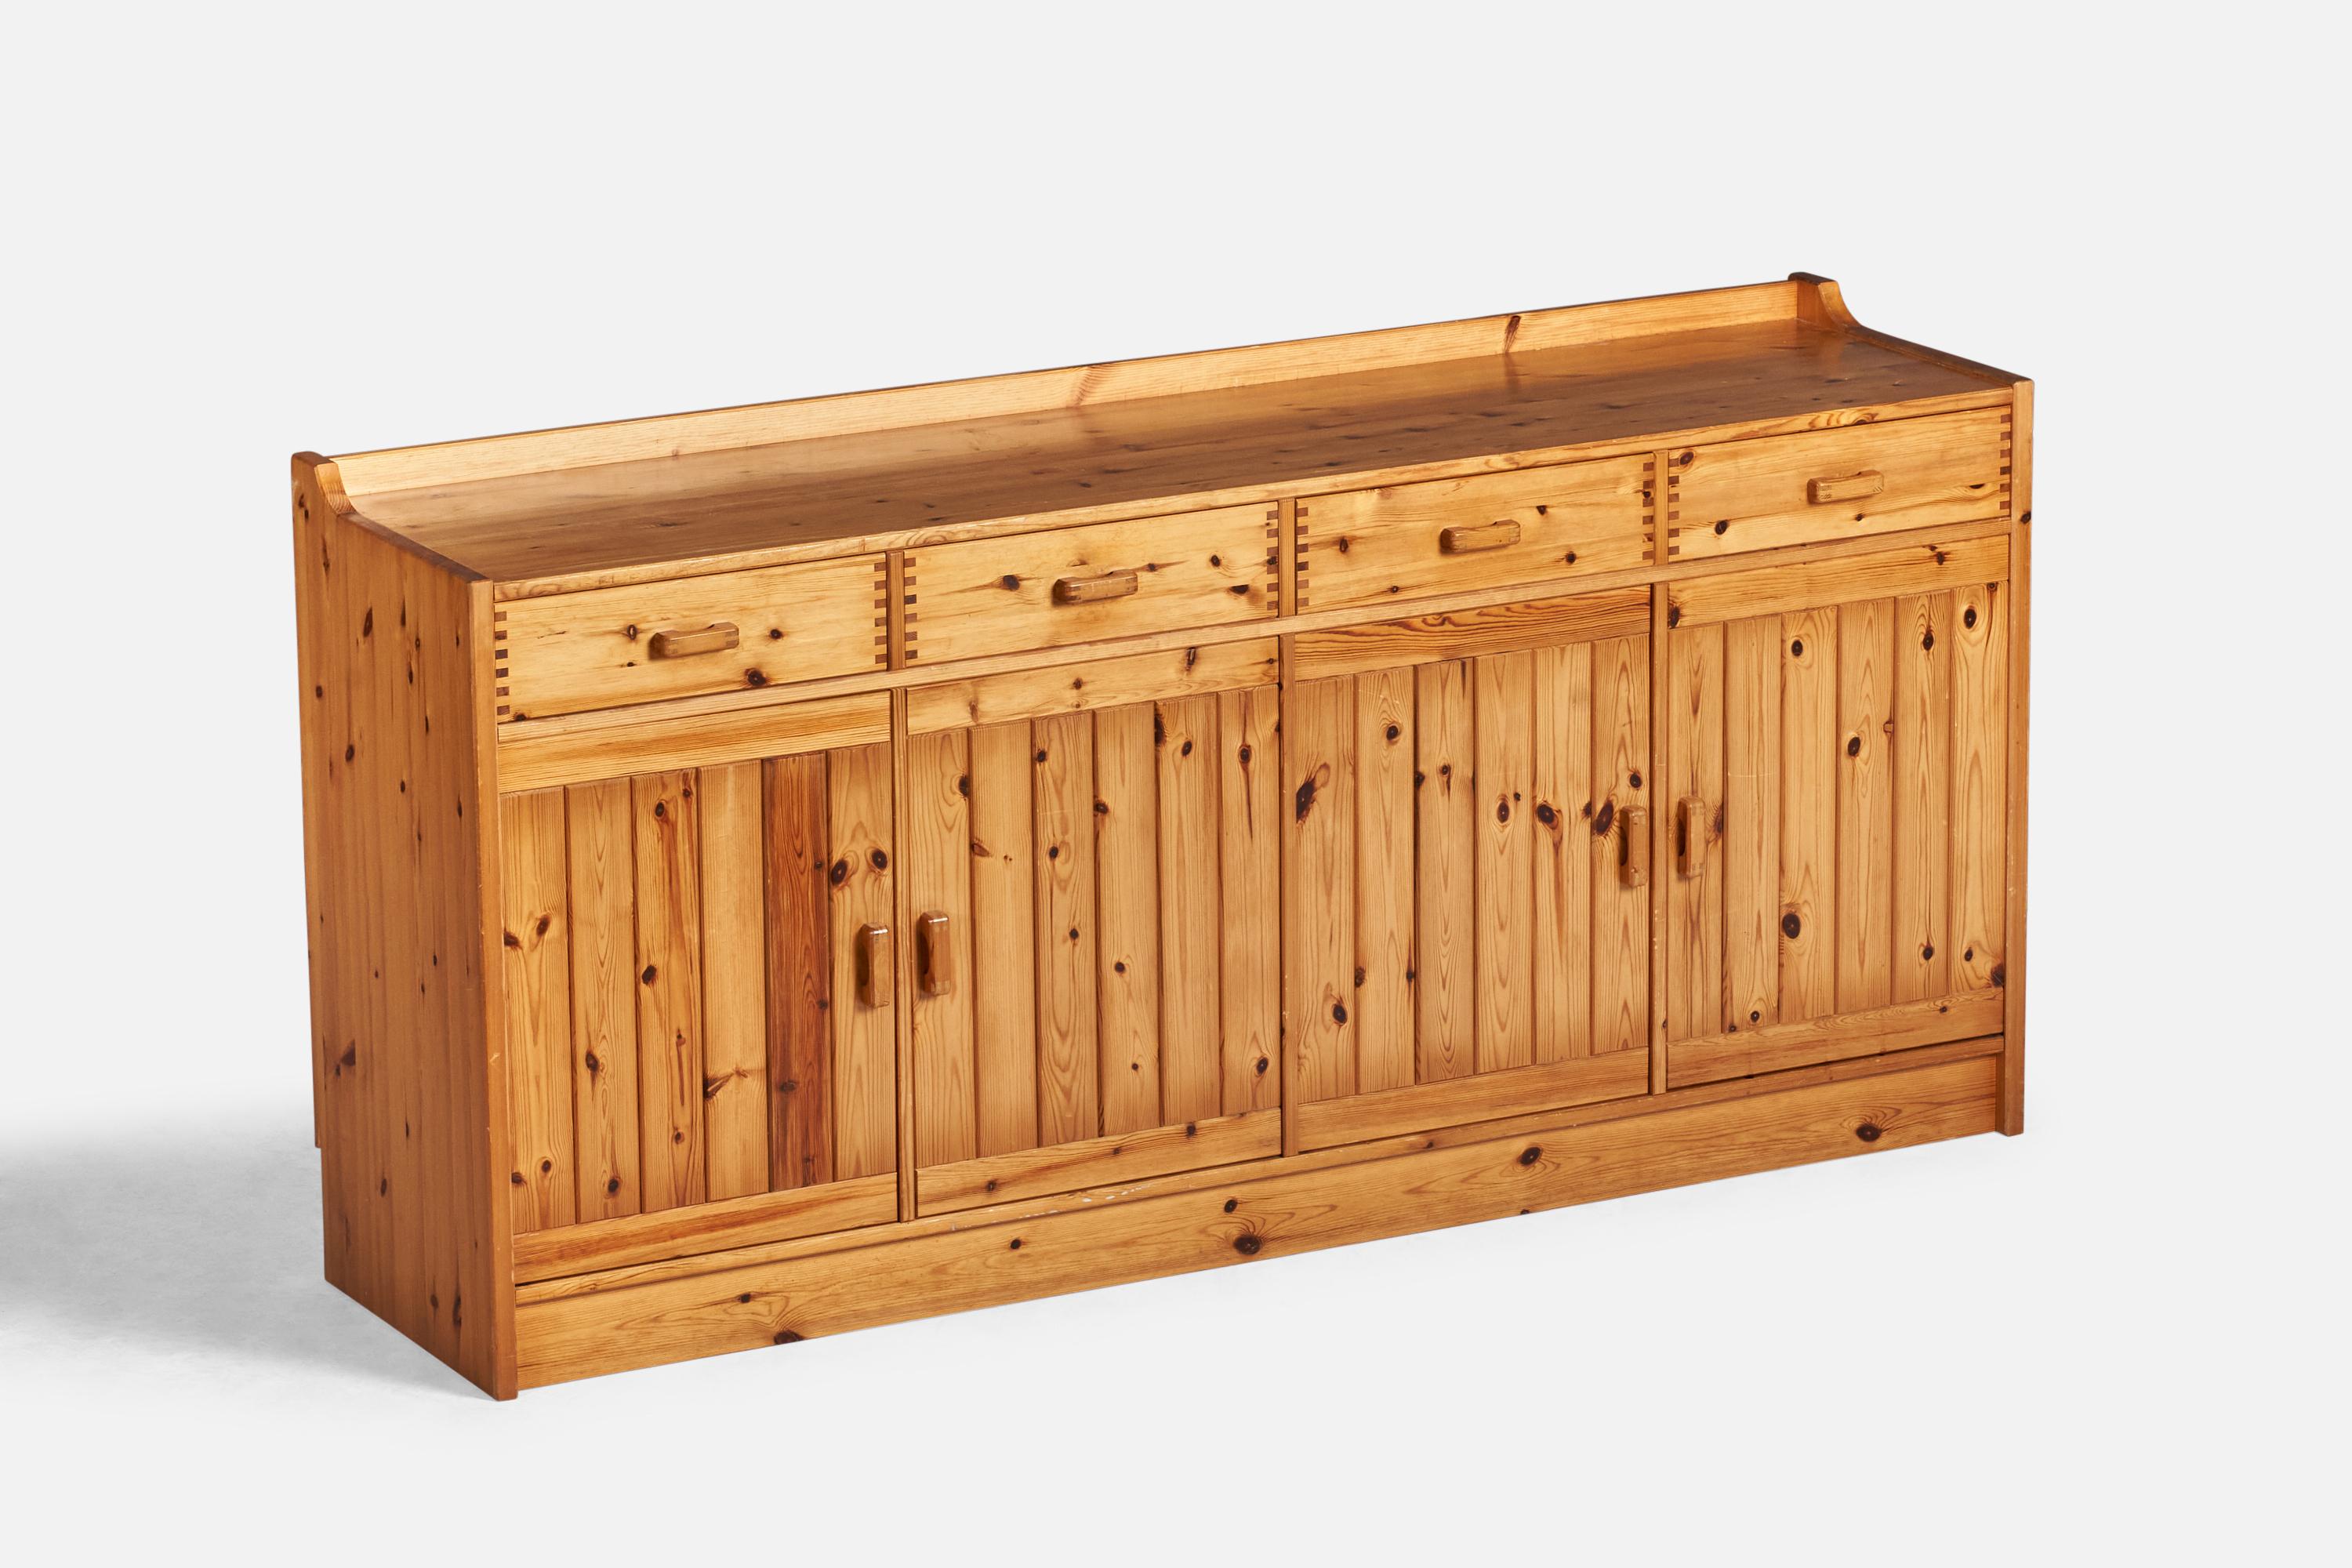 A pine cabinet designed and produced in Denmark, 1970s.